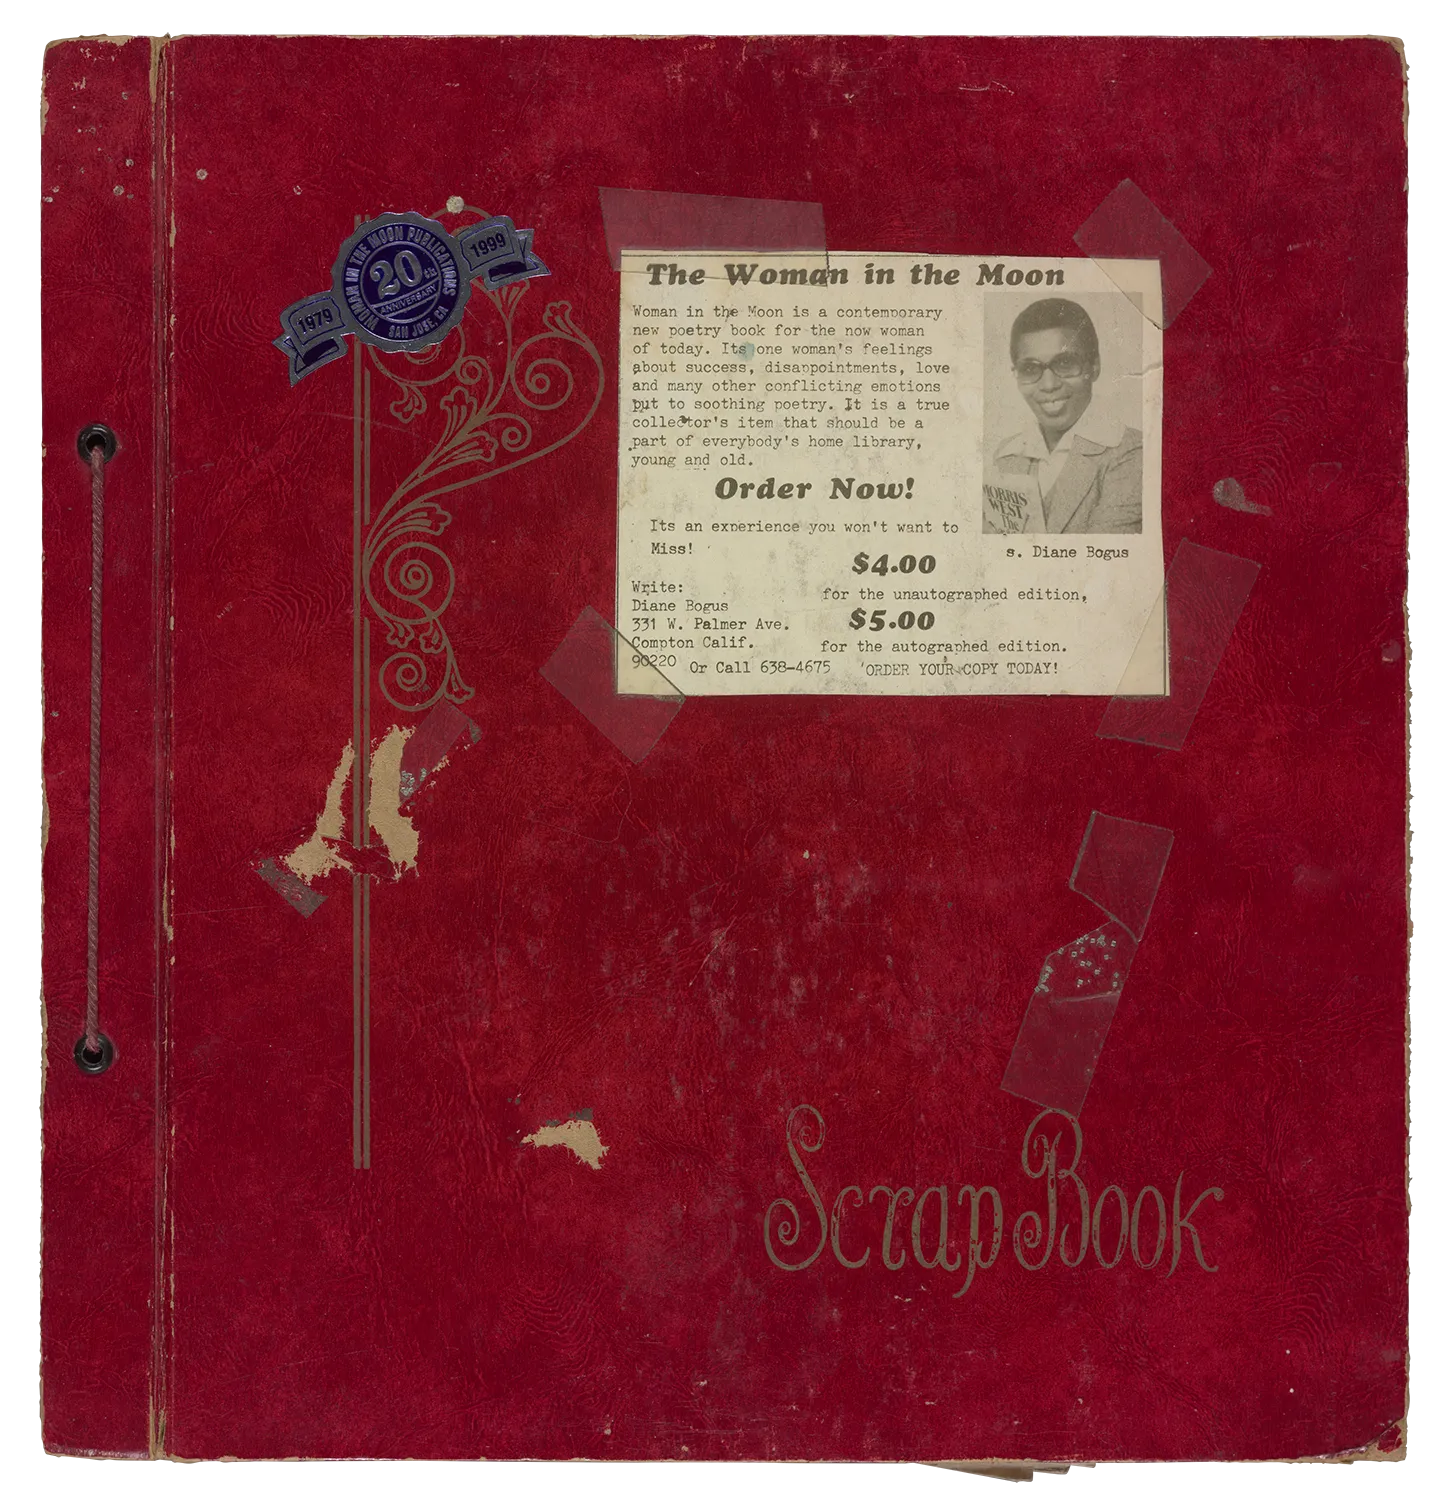 The front cover of a large red scrapbook with gold letters and embellishments. On the cover are stickers and a news clipping.